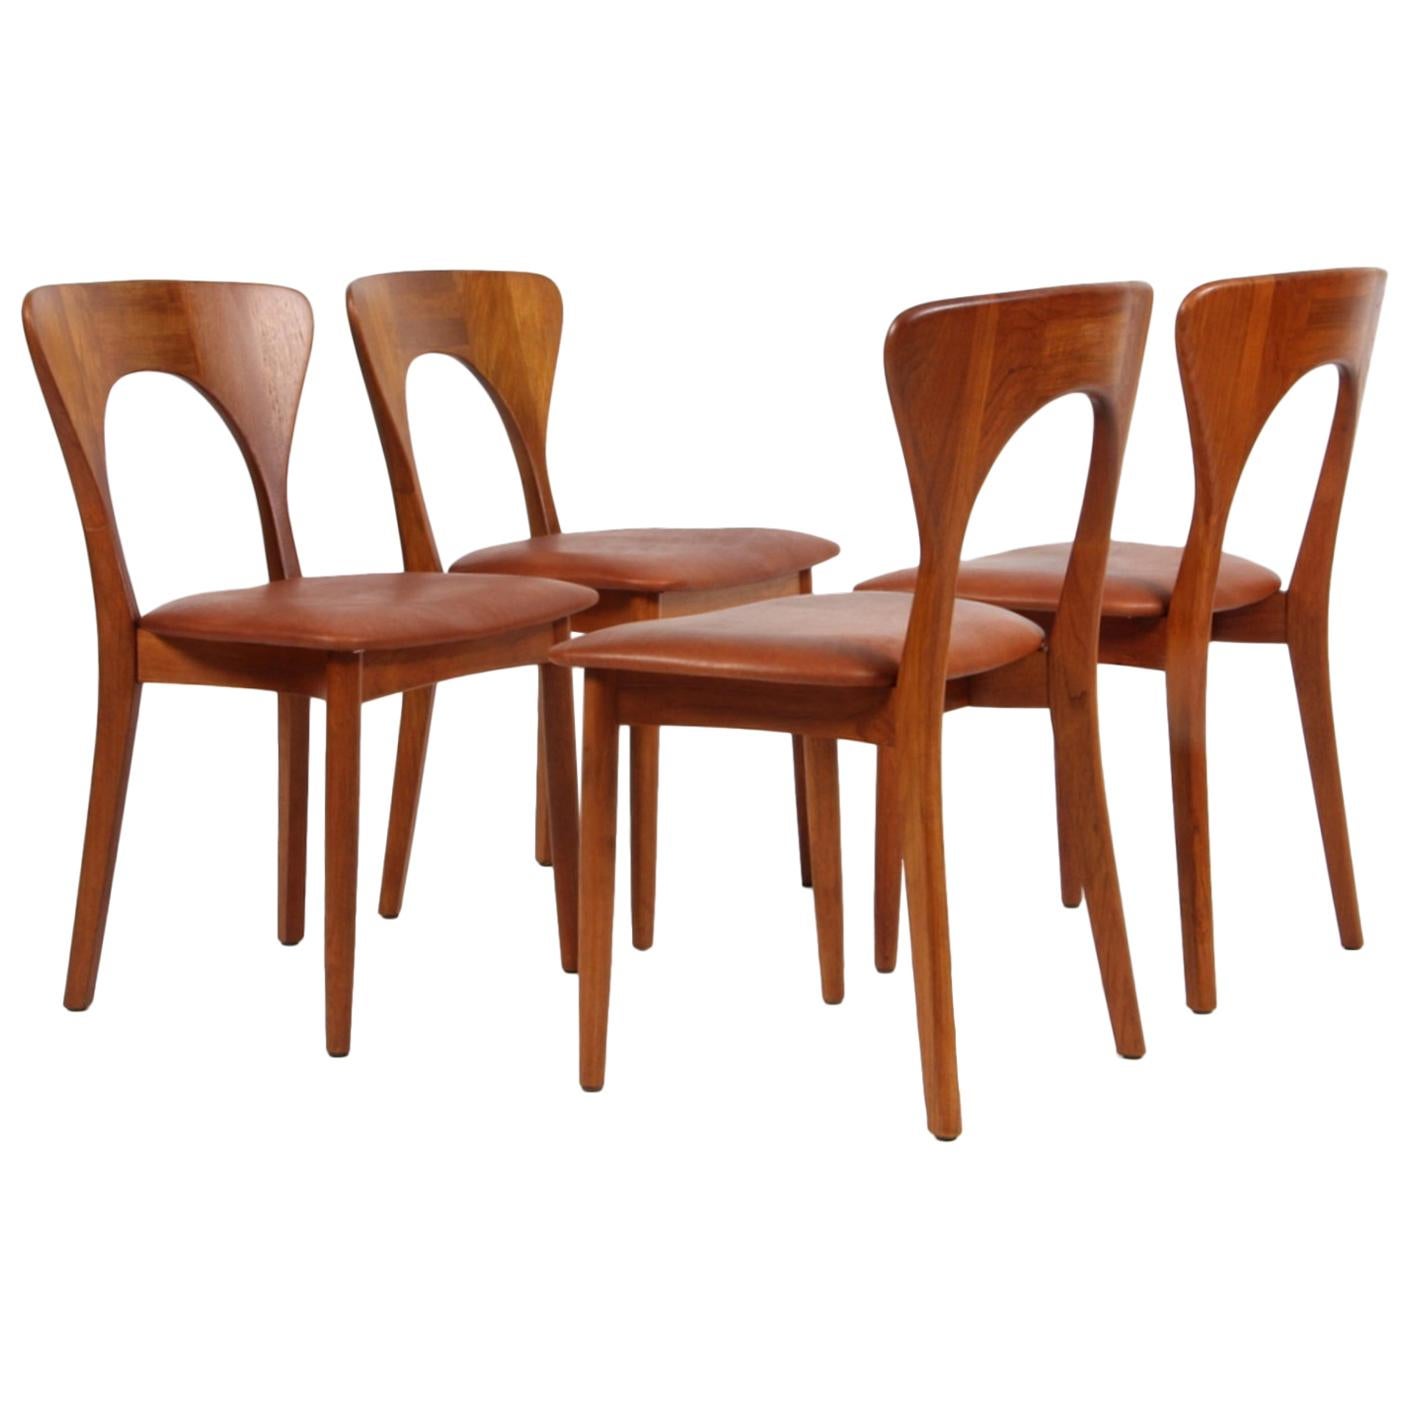 Set of Four Niels Koefoed "Peter" Dining Chairs Teak and Aniline Leather